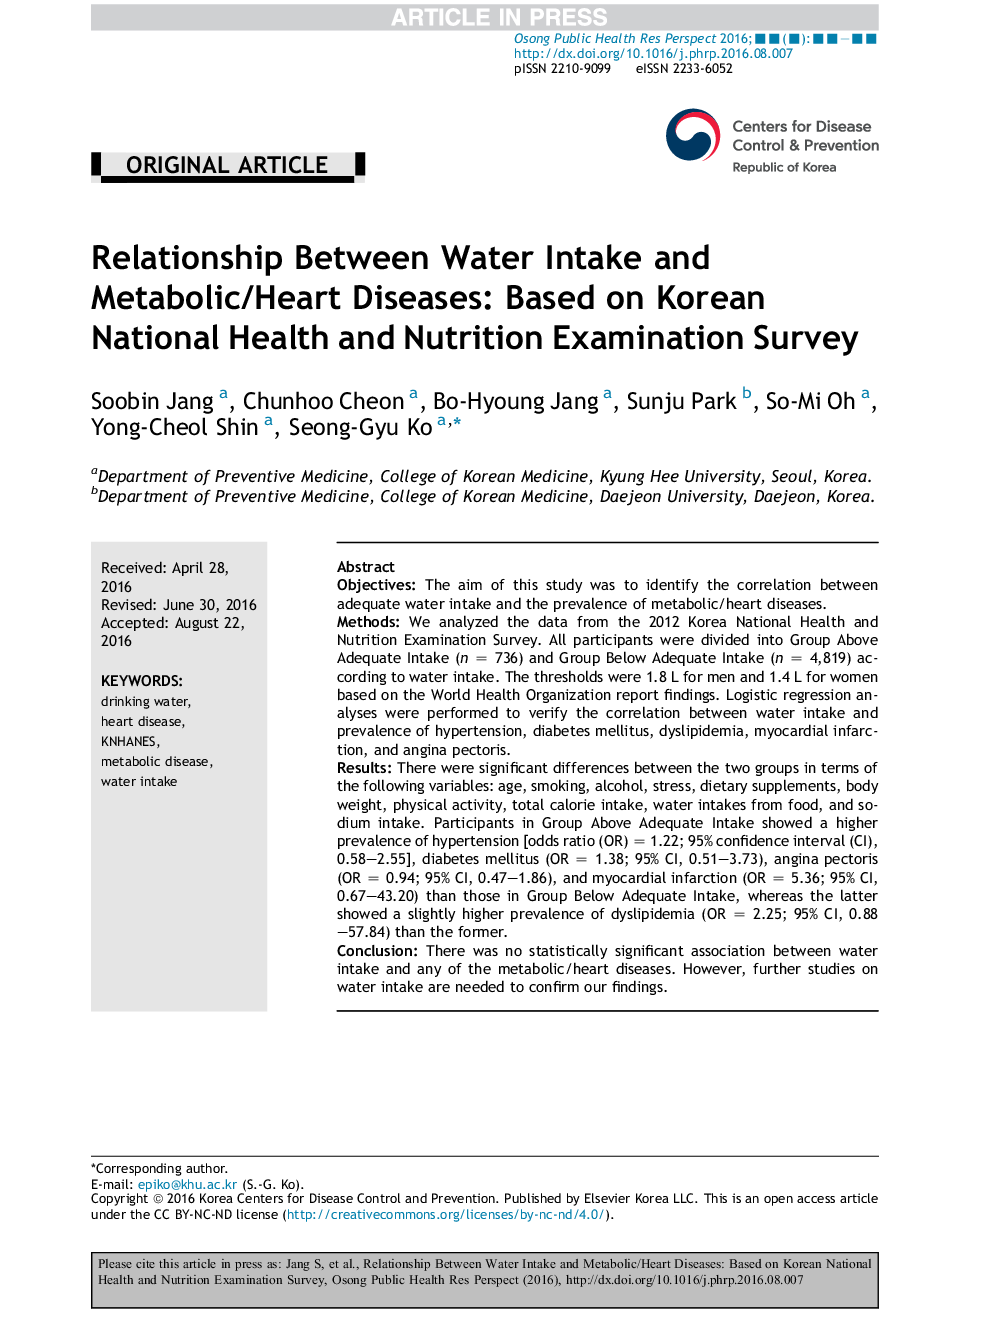 Relationship Between Water Intake and Metabolic/Heart Diseases: Based on Korean National Health and Nutrition Examination Survey